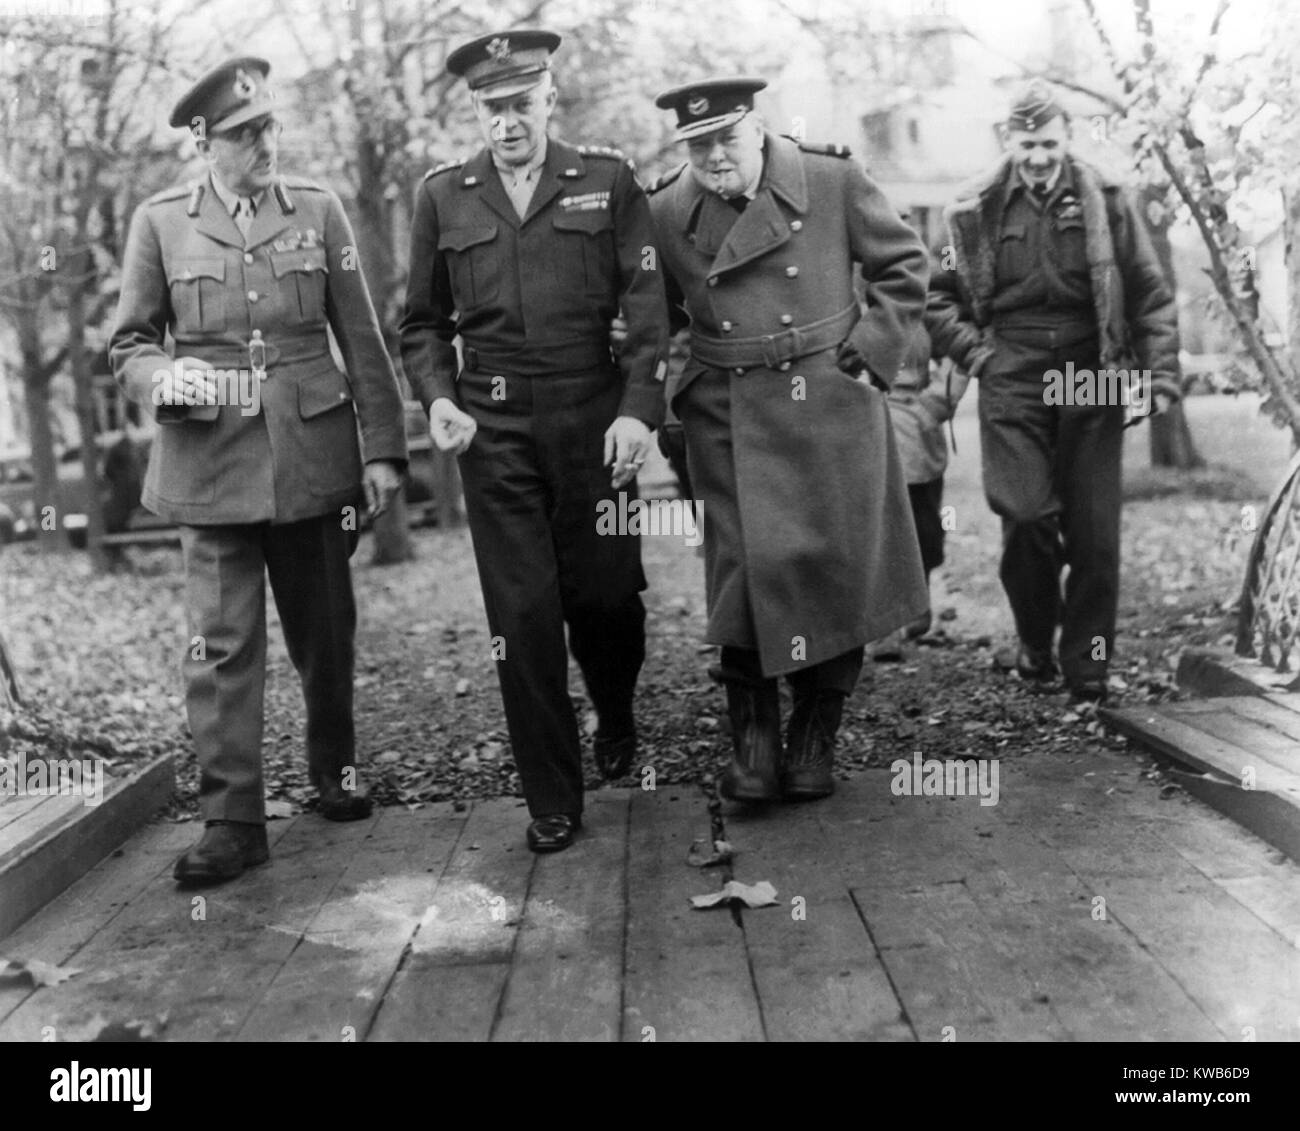 General Dwight Eisenhower with Prime Minister Winston Churchill. At left is General Sir Alan Brooke and at right is RAF General Sir Arthur Tedder. Ca. 1943-45. World War 2. (BSLOC 2014 8 113) Stock Photo